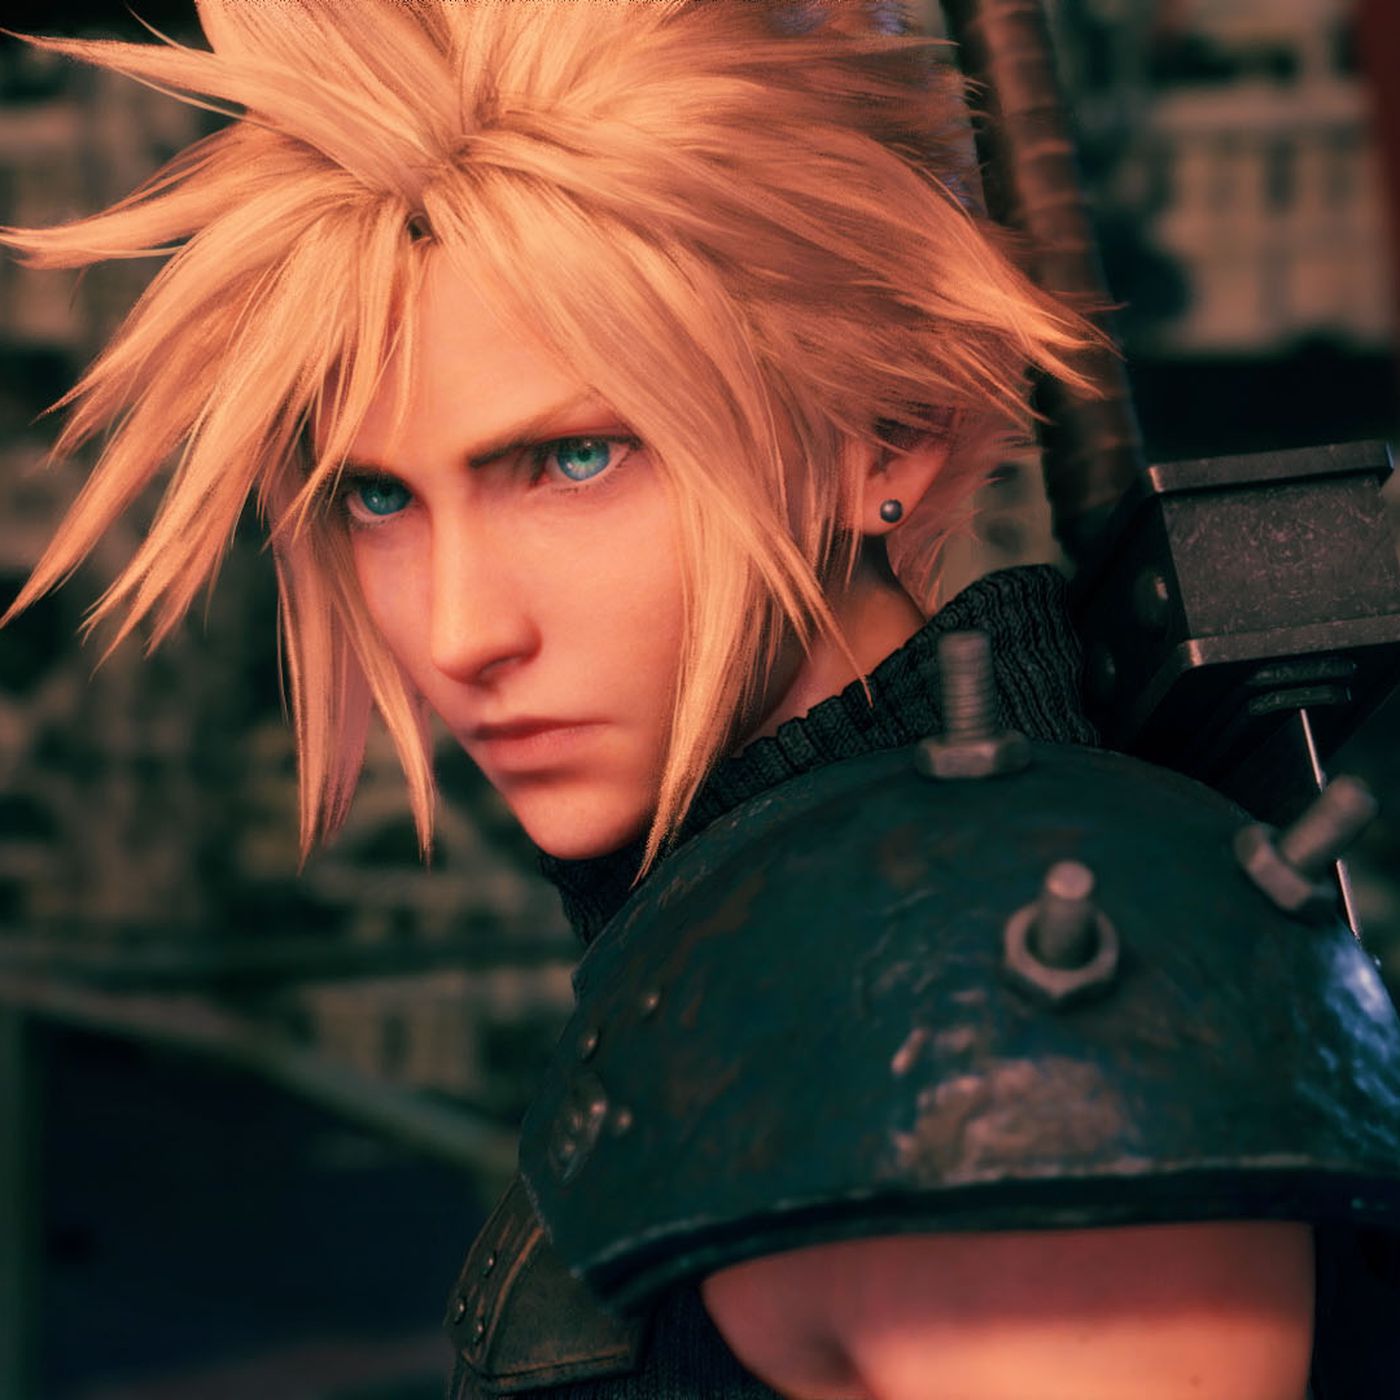 Final Fantasy 7 Remake review: bloated, and beautiful